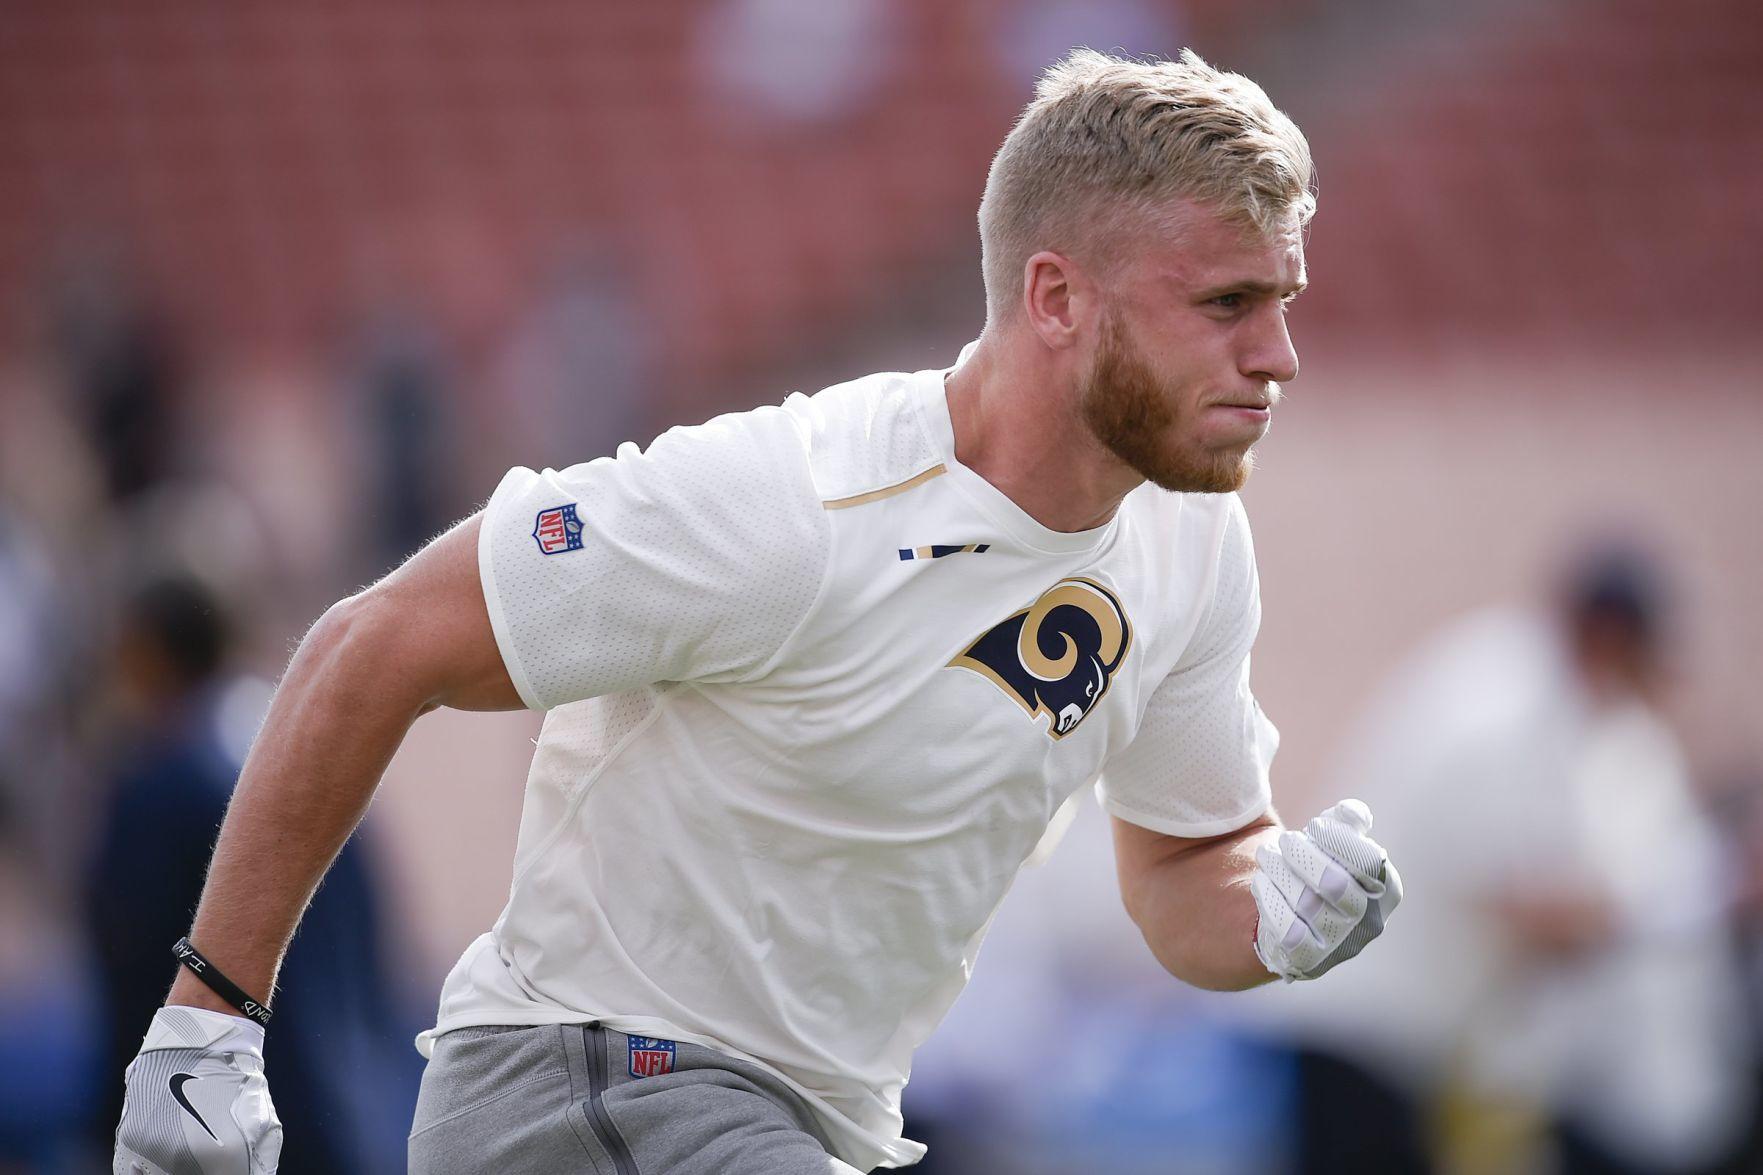 How Smart was Cooper Kupp? Rams WR Taught his own Coaches